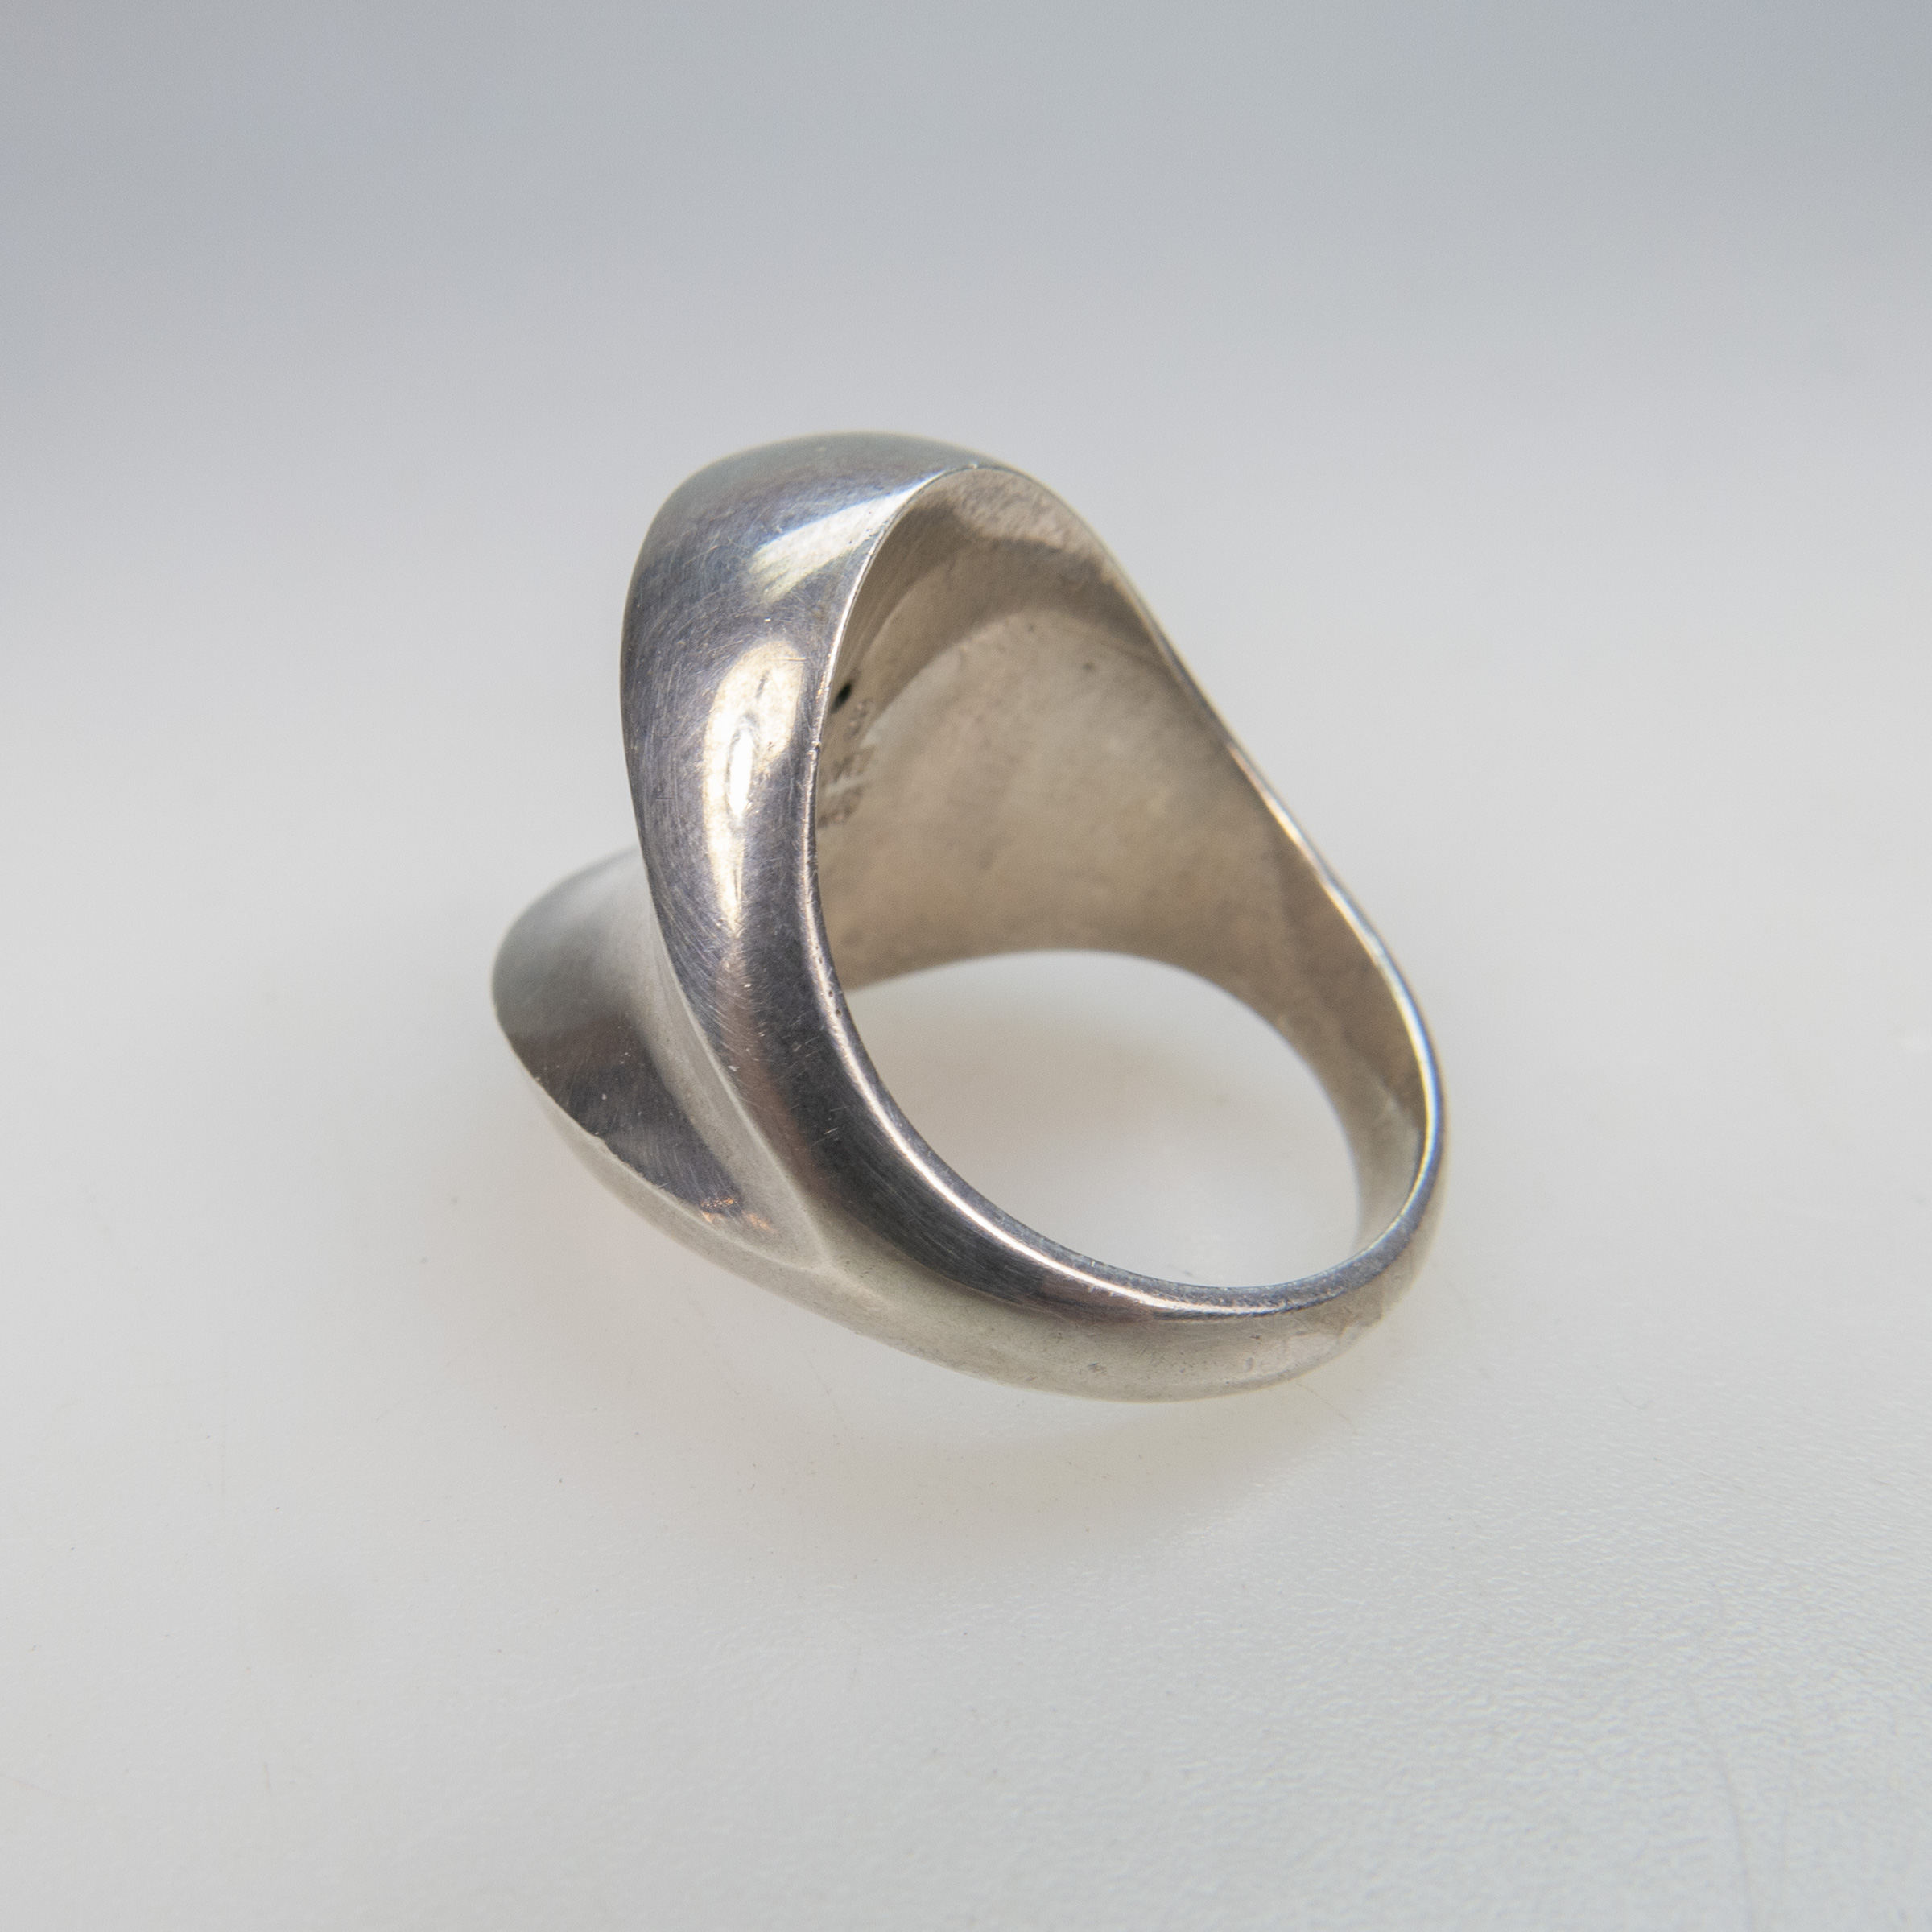 Just Anderson Danish Sterling Silver Ring